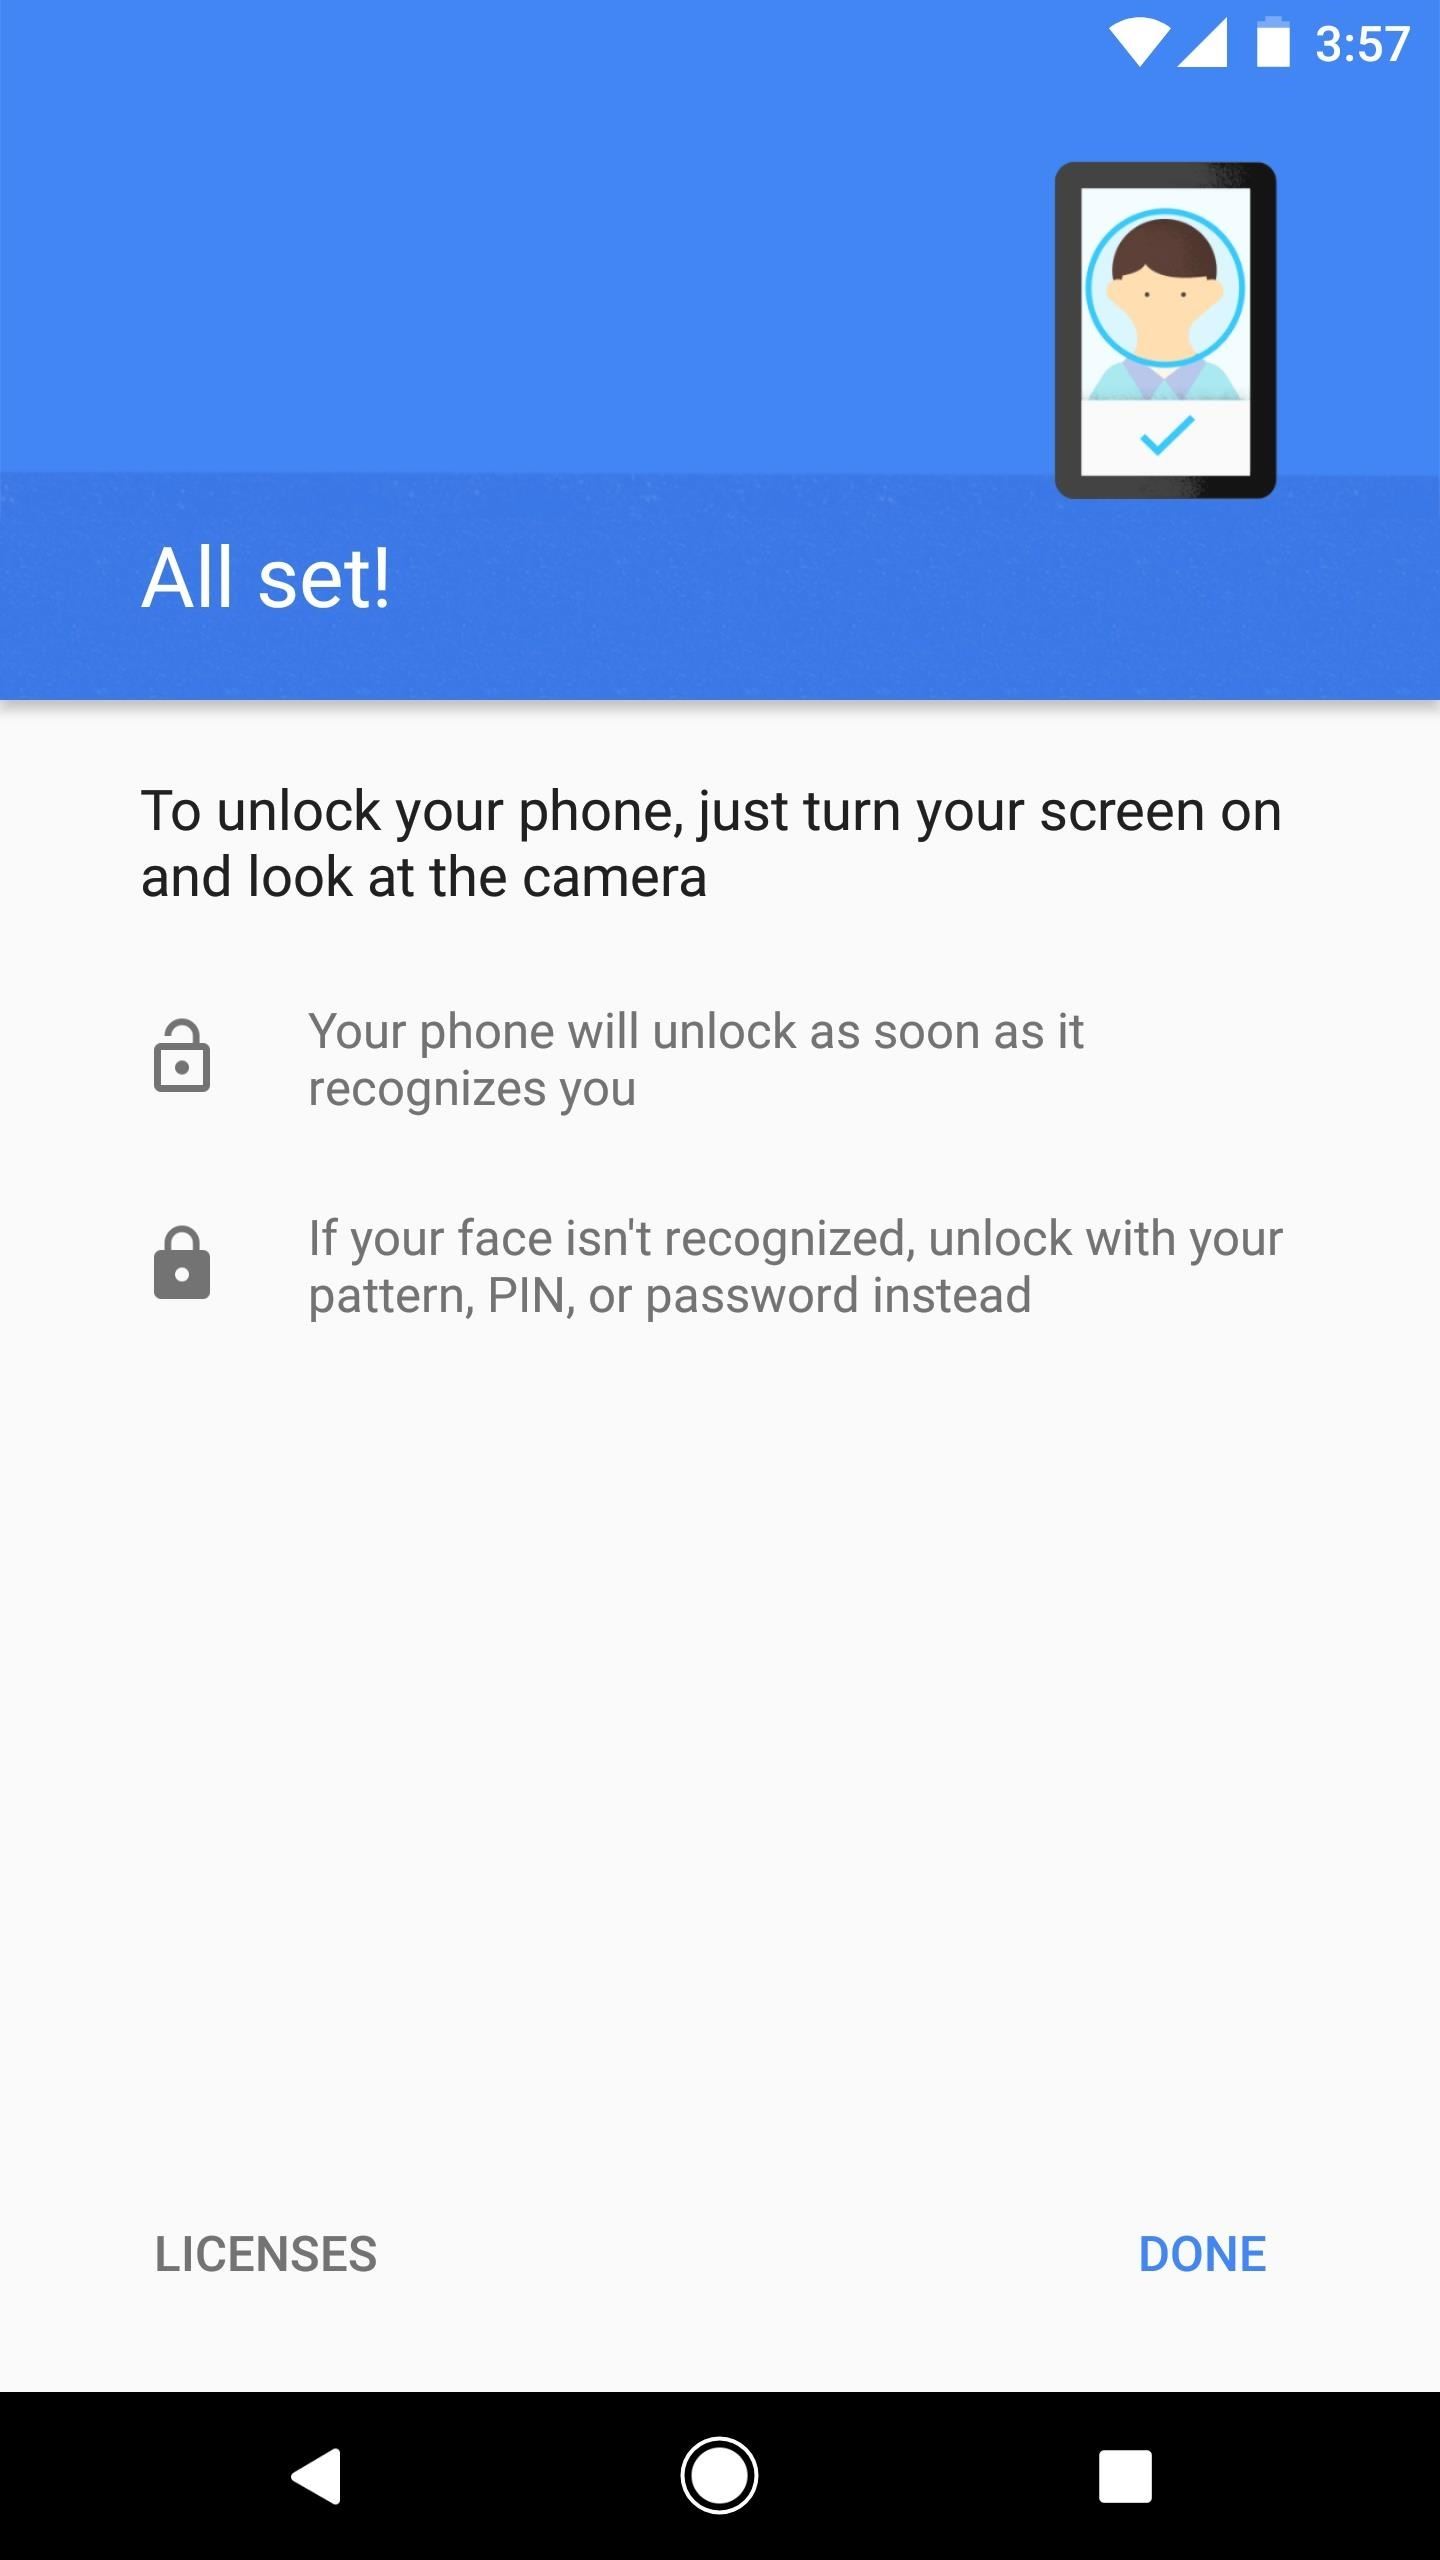 Your Android Phone Comes with a Face ID Feature Built In — Here's How to Use It